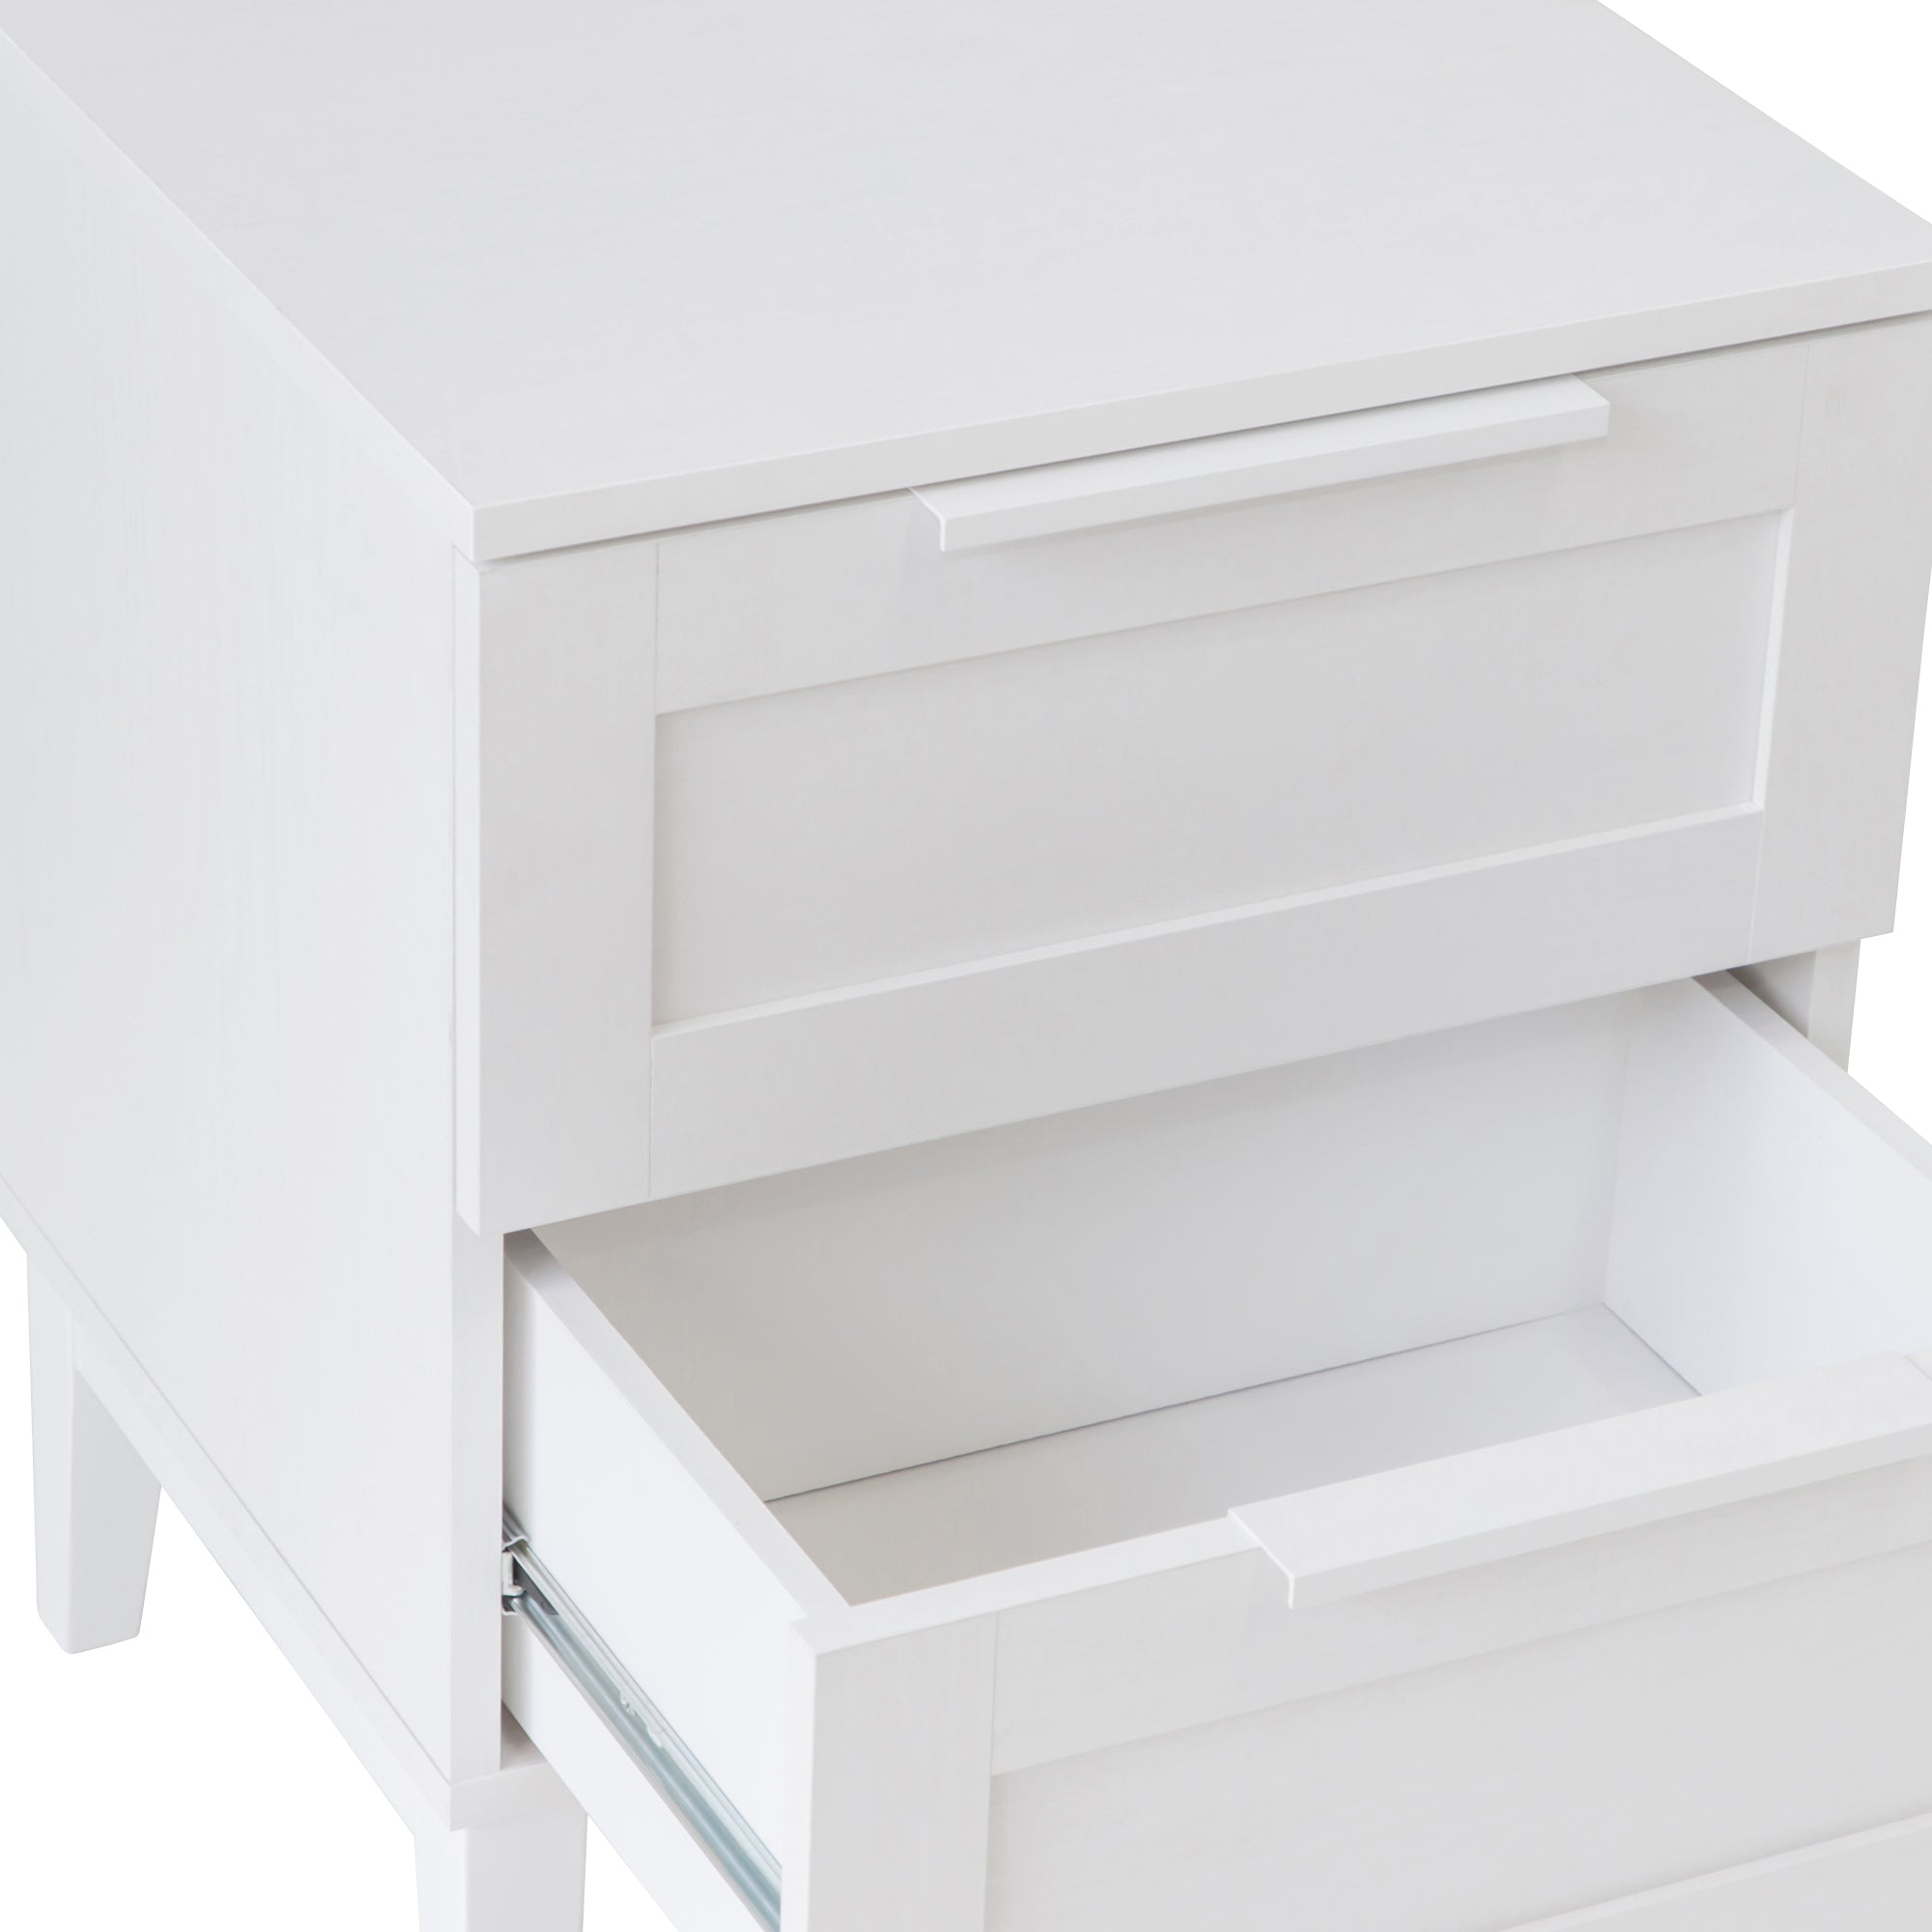 Tenley 2 Drawer Bedside Table - White